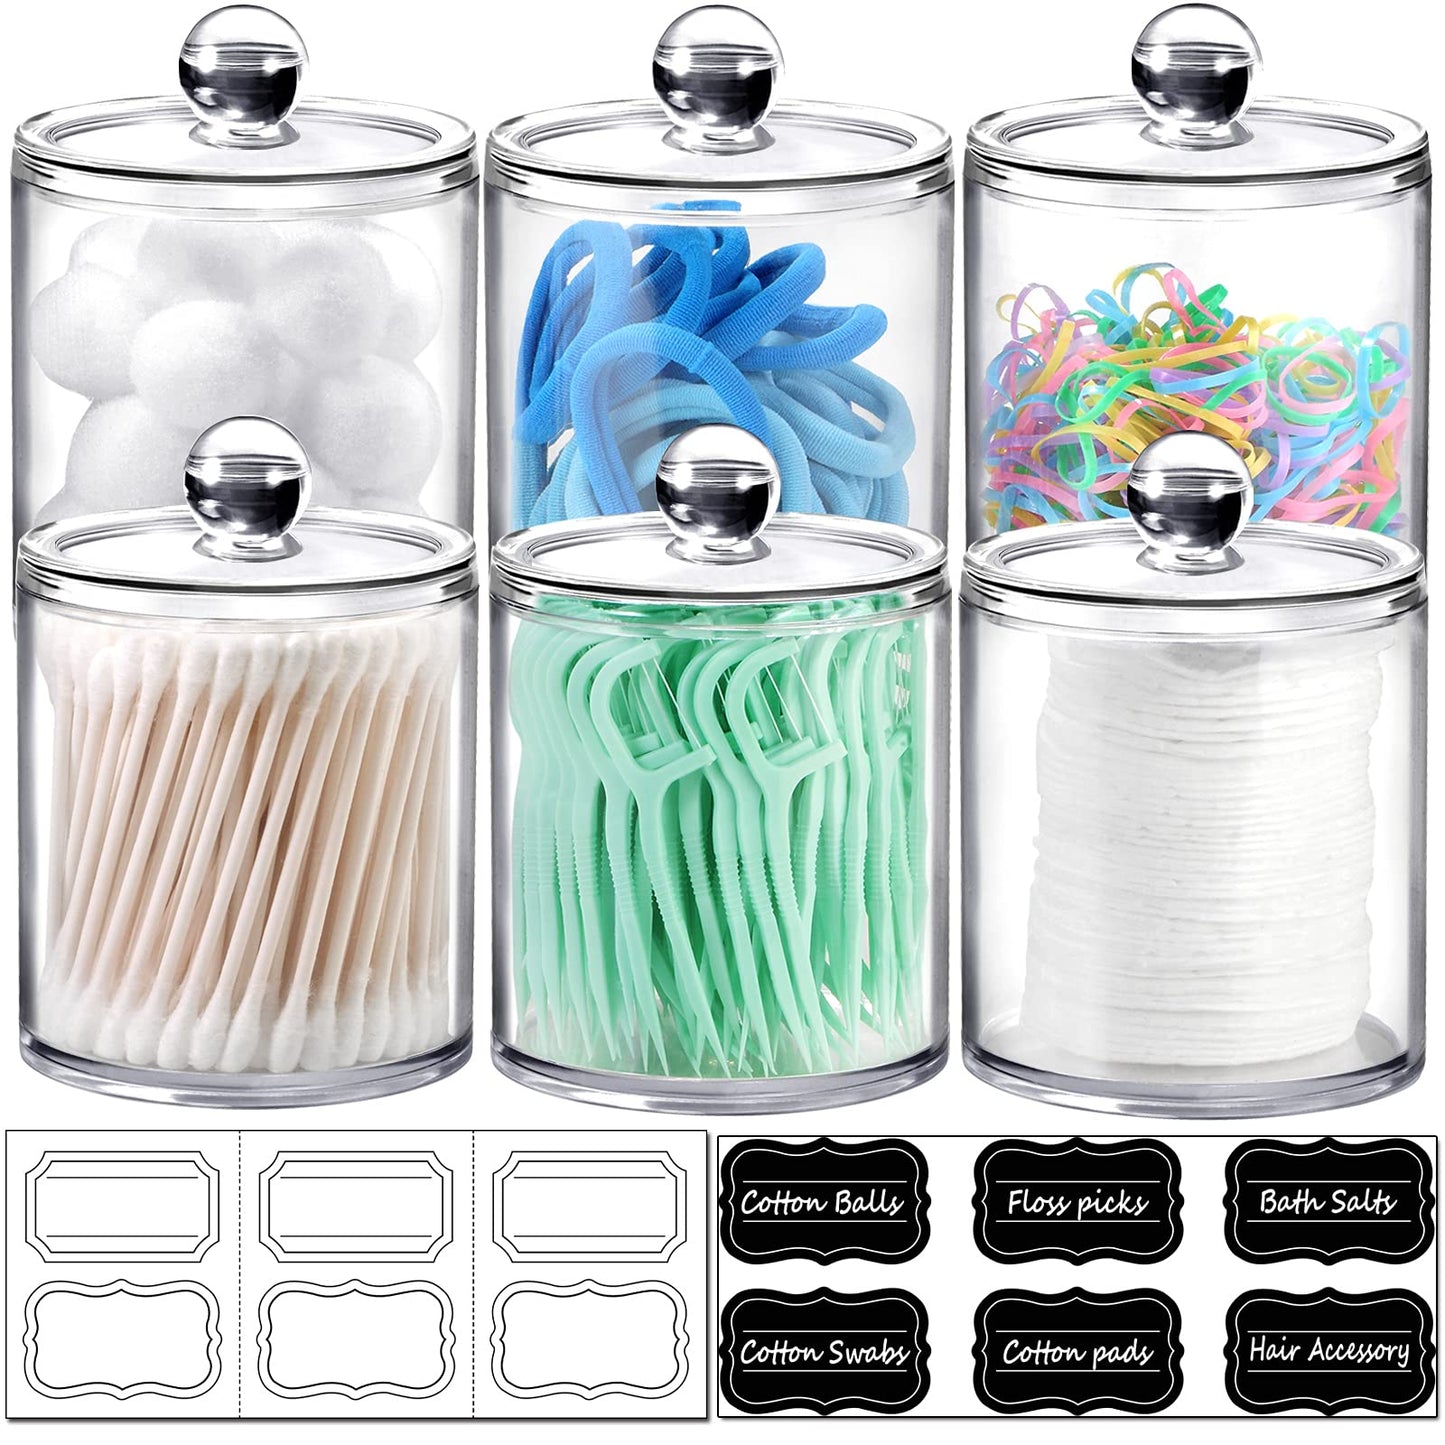 6 Pack of 12 Oz. Qtip Dispenser Apothecary Jars Bathroom with Labels - Holder Storage Canister Clear Plastic Acrylic Jar for Cotton Ball,Cotton Swab,Cotton Rounds,Floss Picks, Hair Clips (Clear)